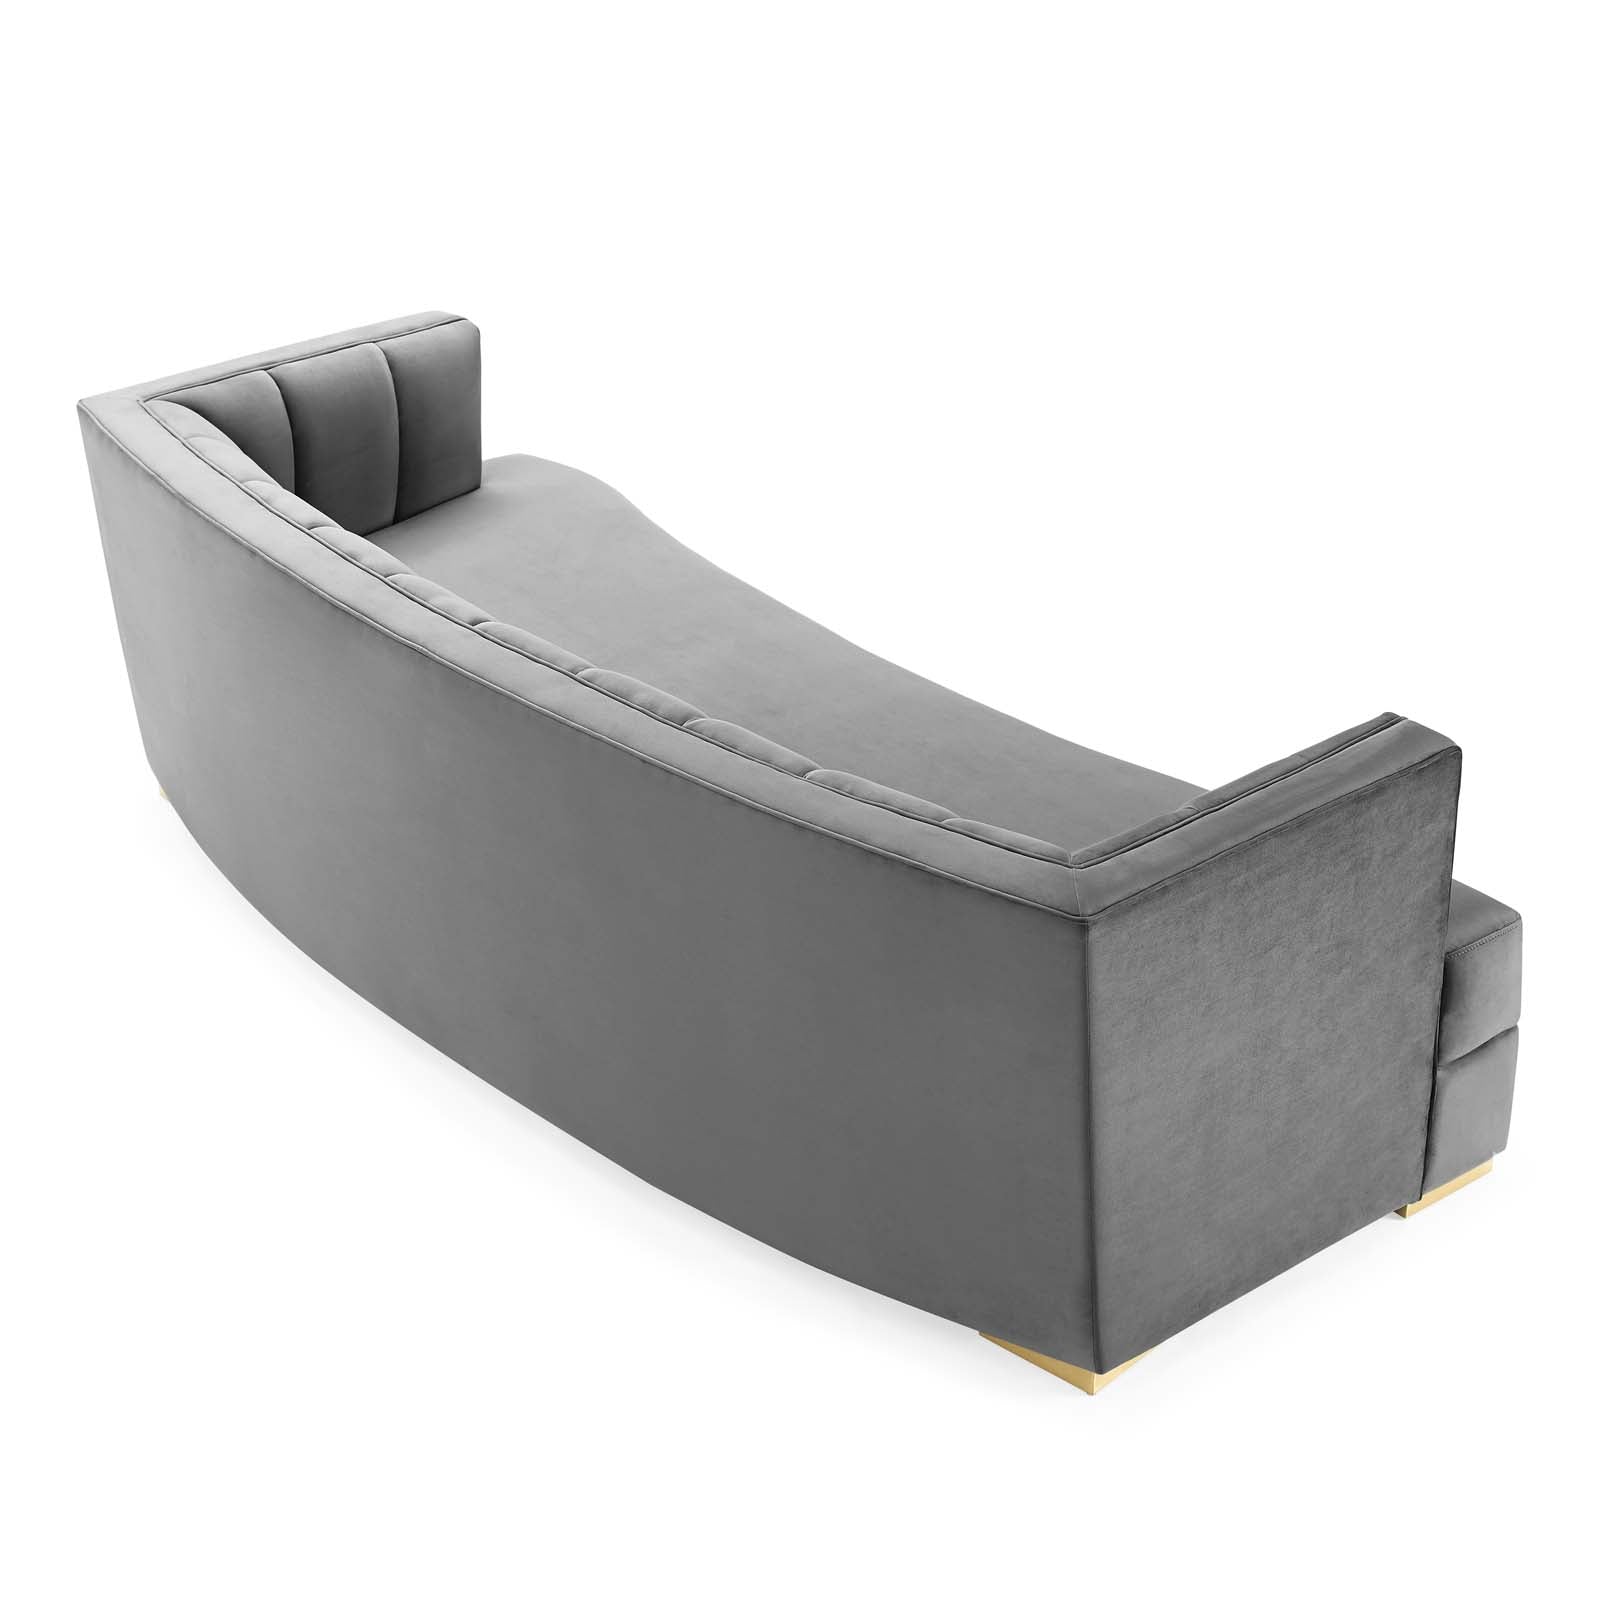 Modway Sofas & Couches - Encompass Channel Tufted Performance Velvet Curved Sofa Gray